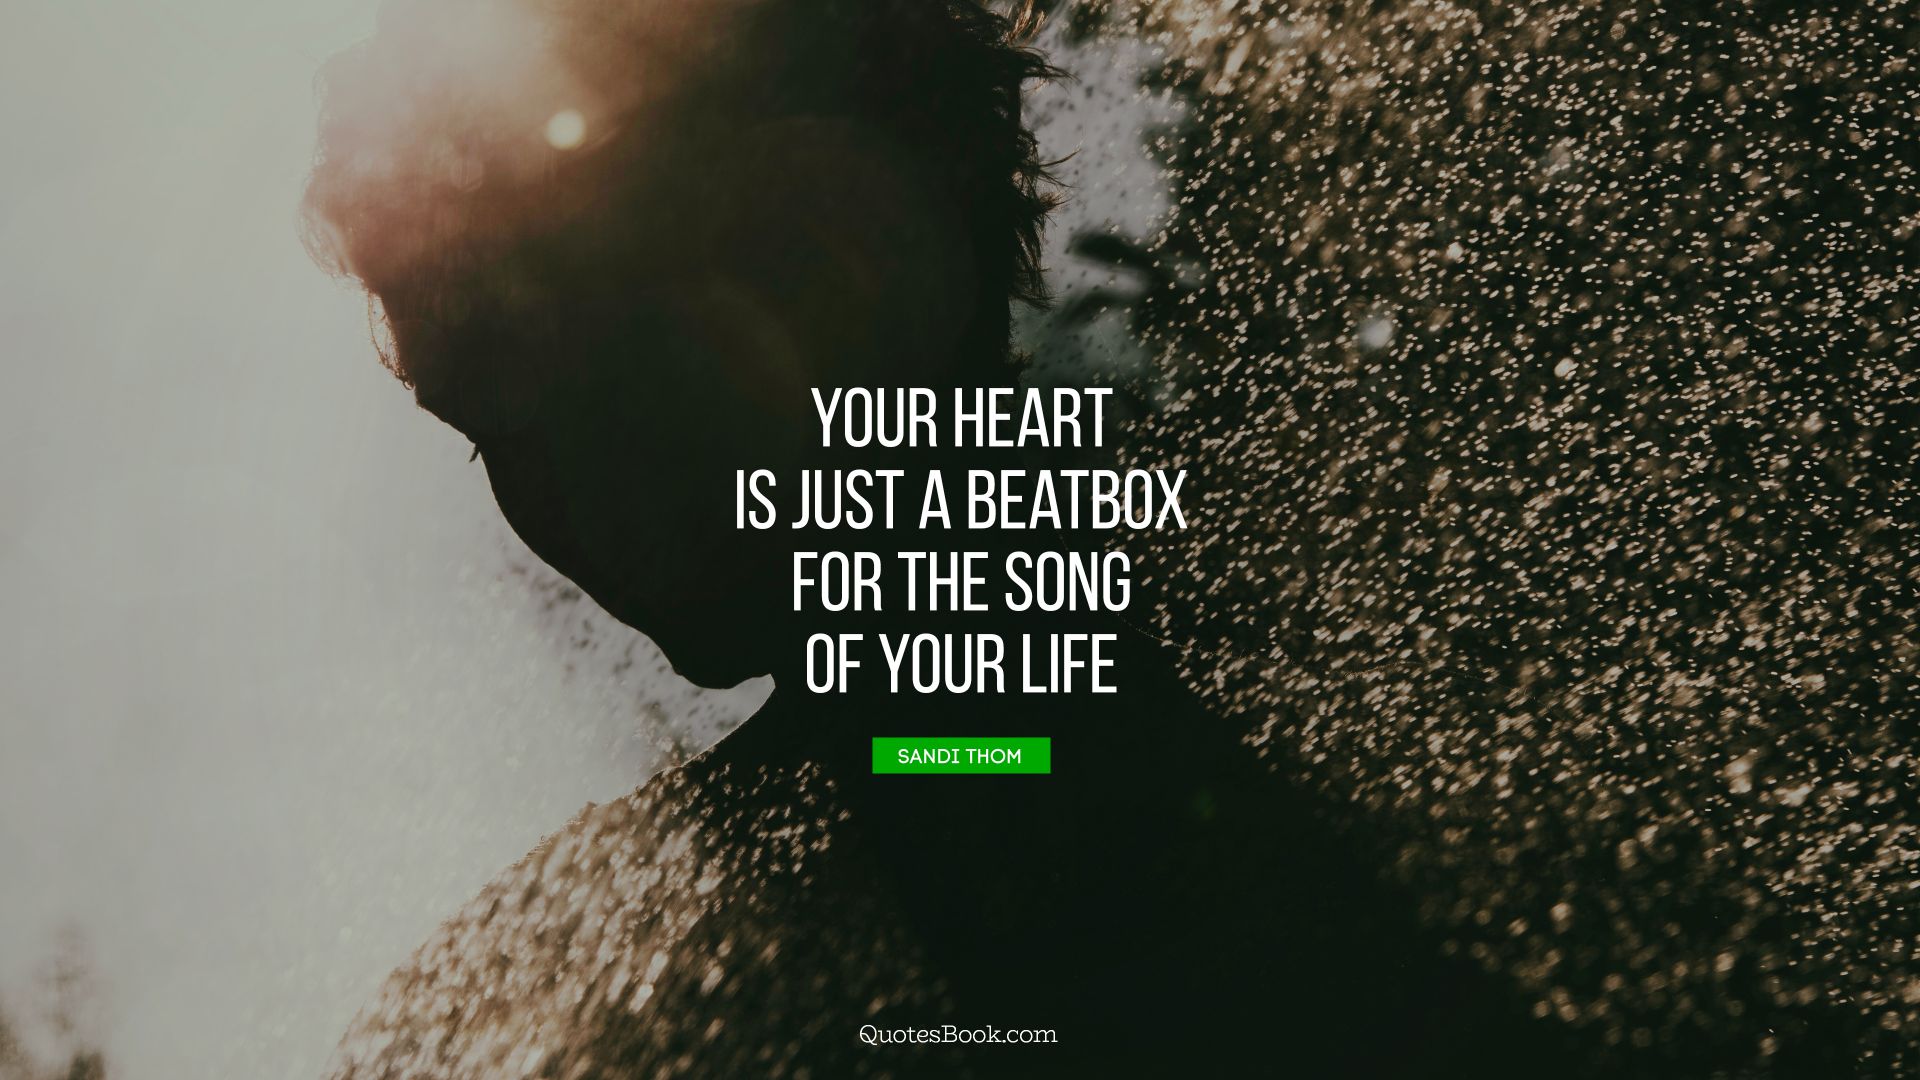 Your heart is just a beatbox for the song of your life. - Quote by Sandi Thom